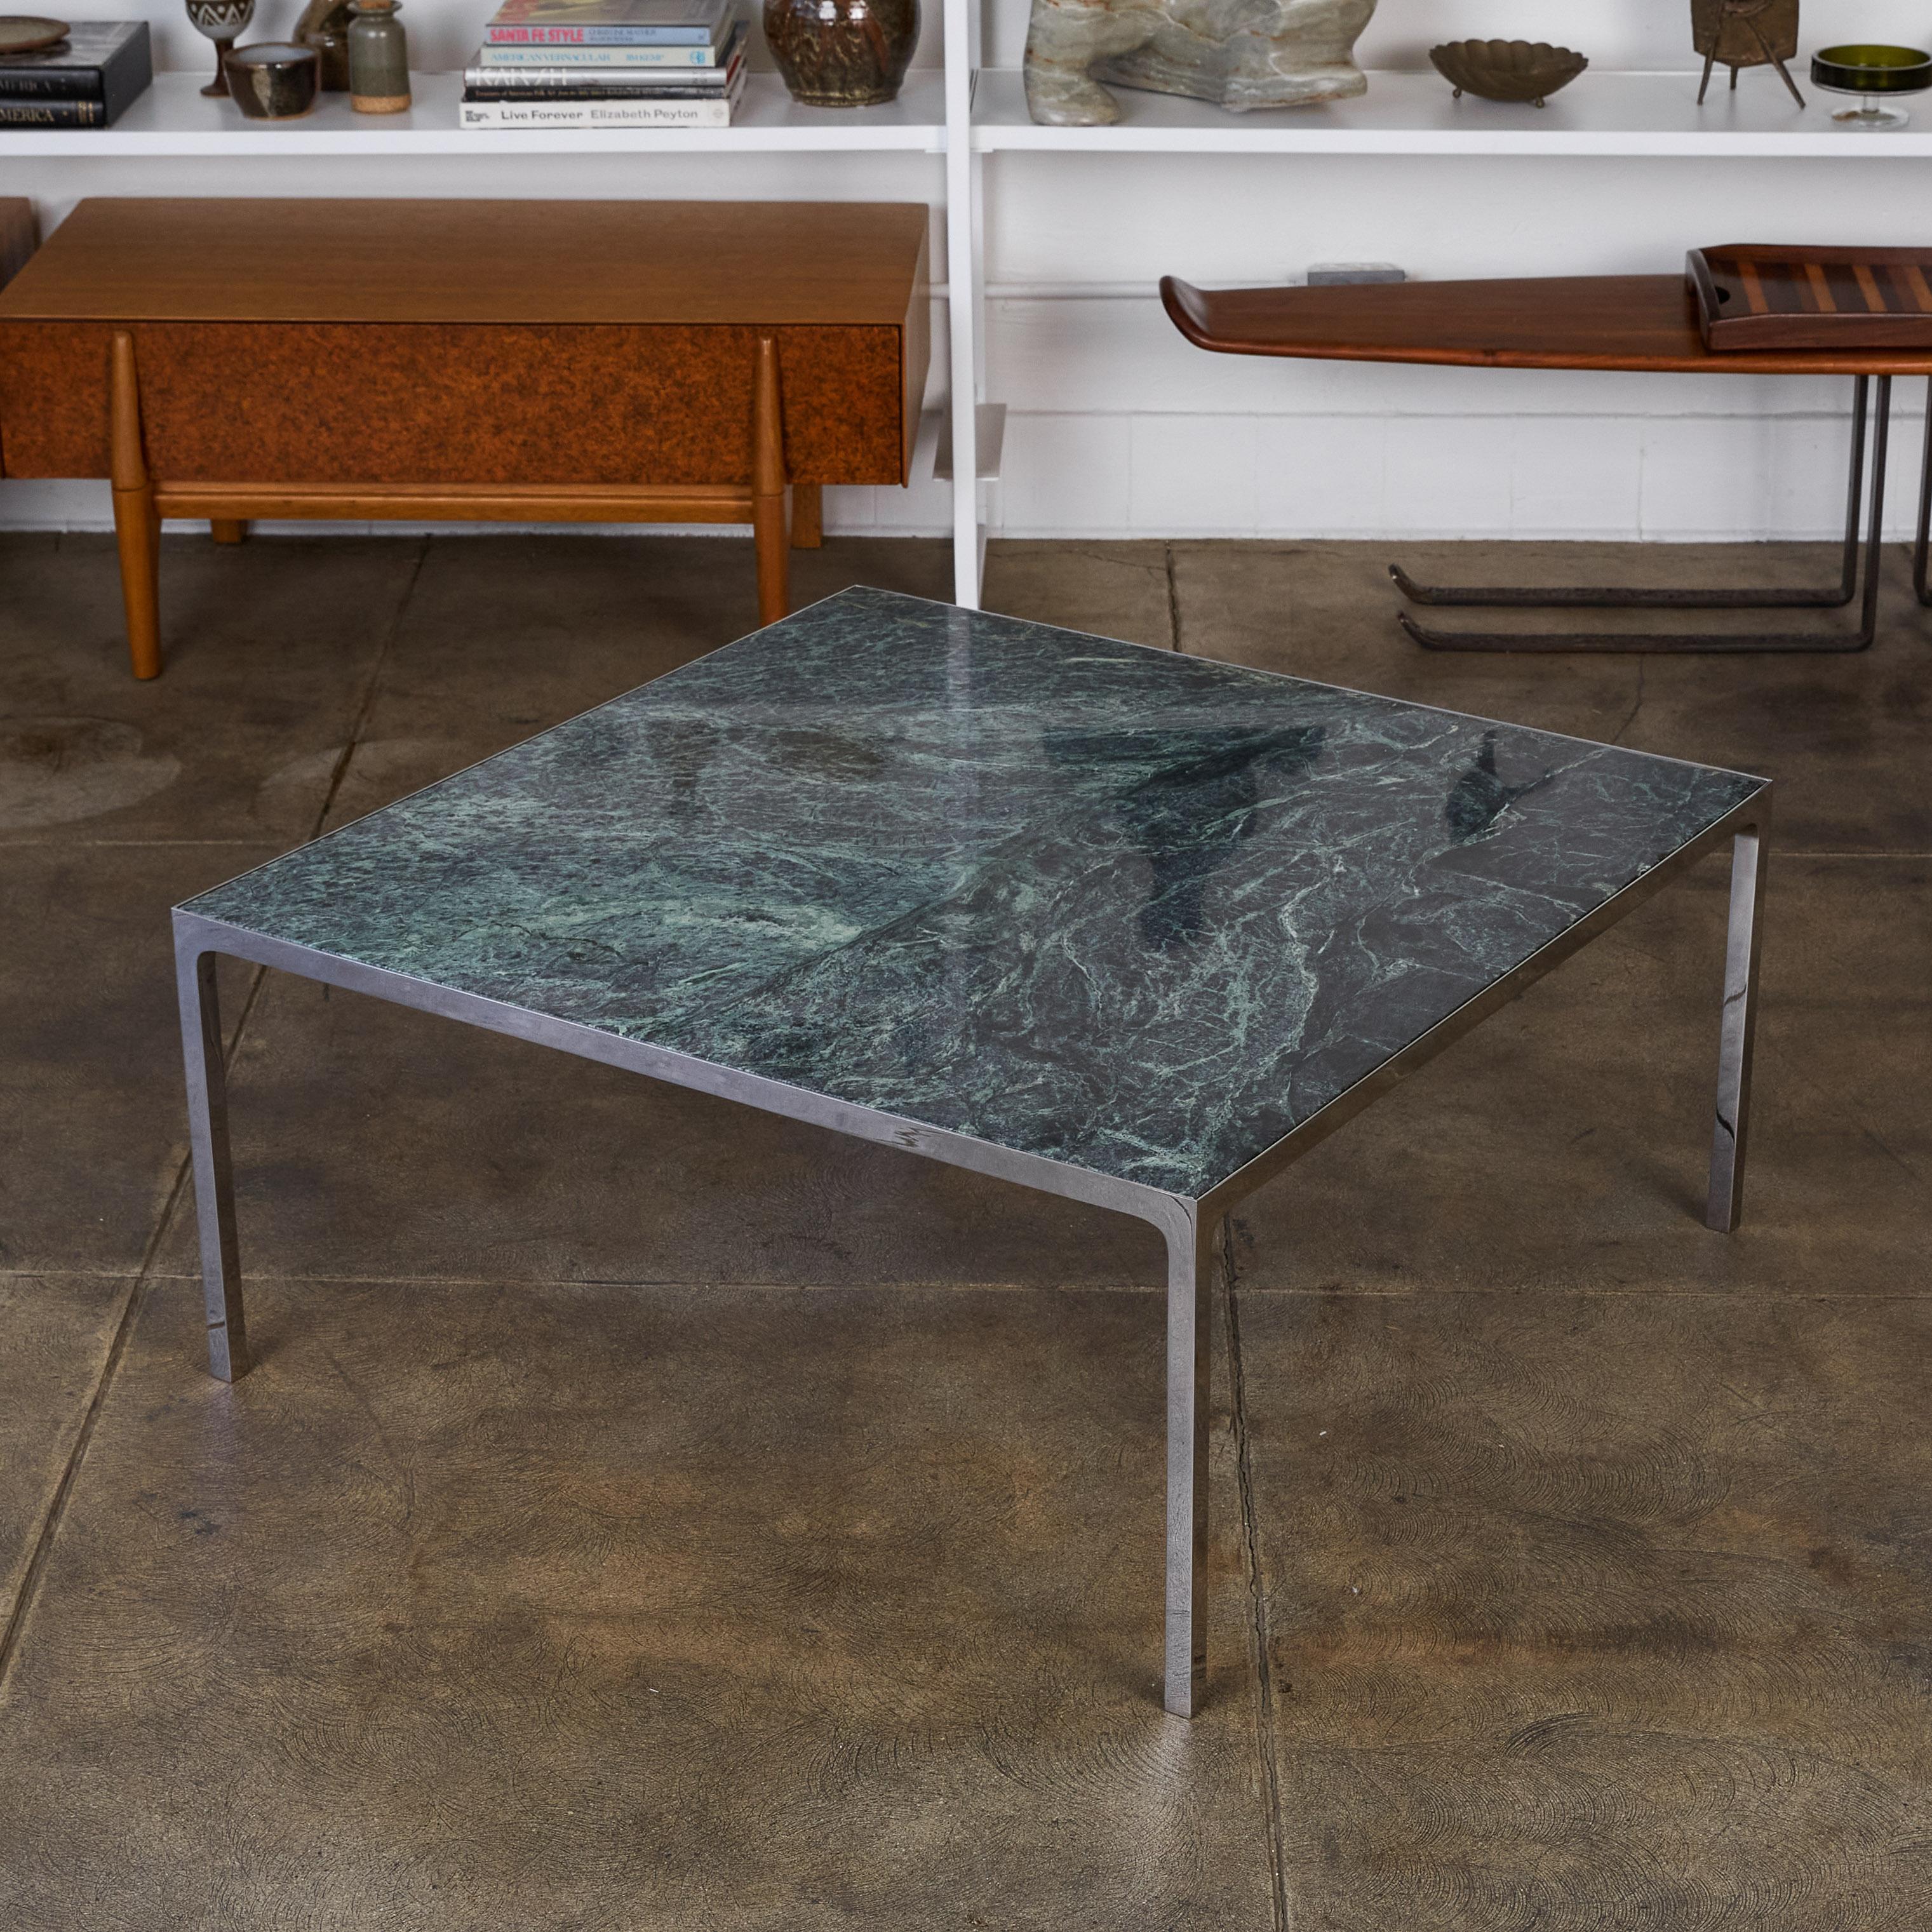 Polished stainless steel coffee table with green marble top by Nicos Zographos from the 1960s. Italian marble is inset into the clean Minimalist steel frame. 

Condition: Excellent vintage condition; frame has been polished.

Dimensions: 36” width x